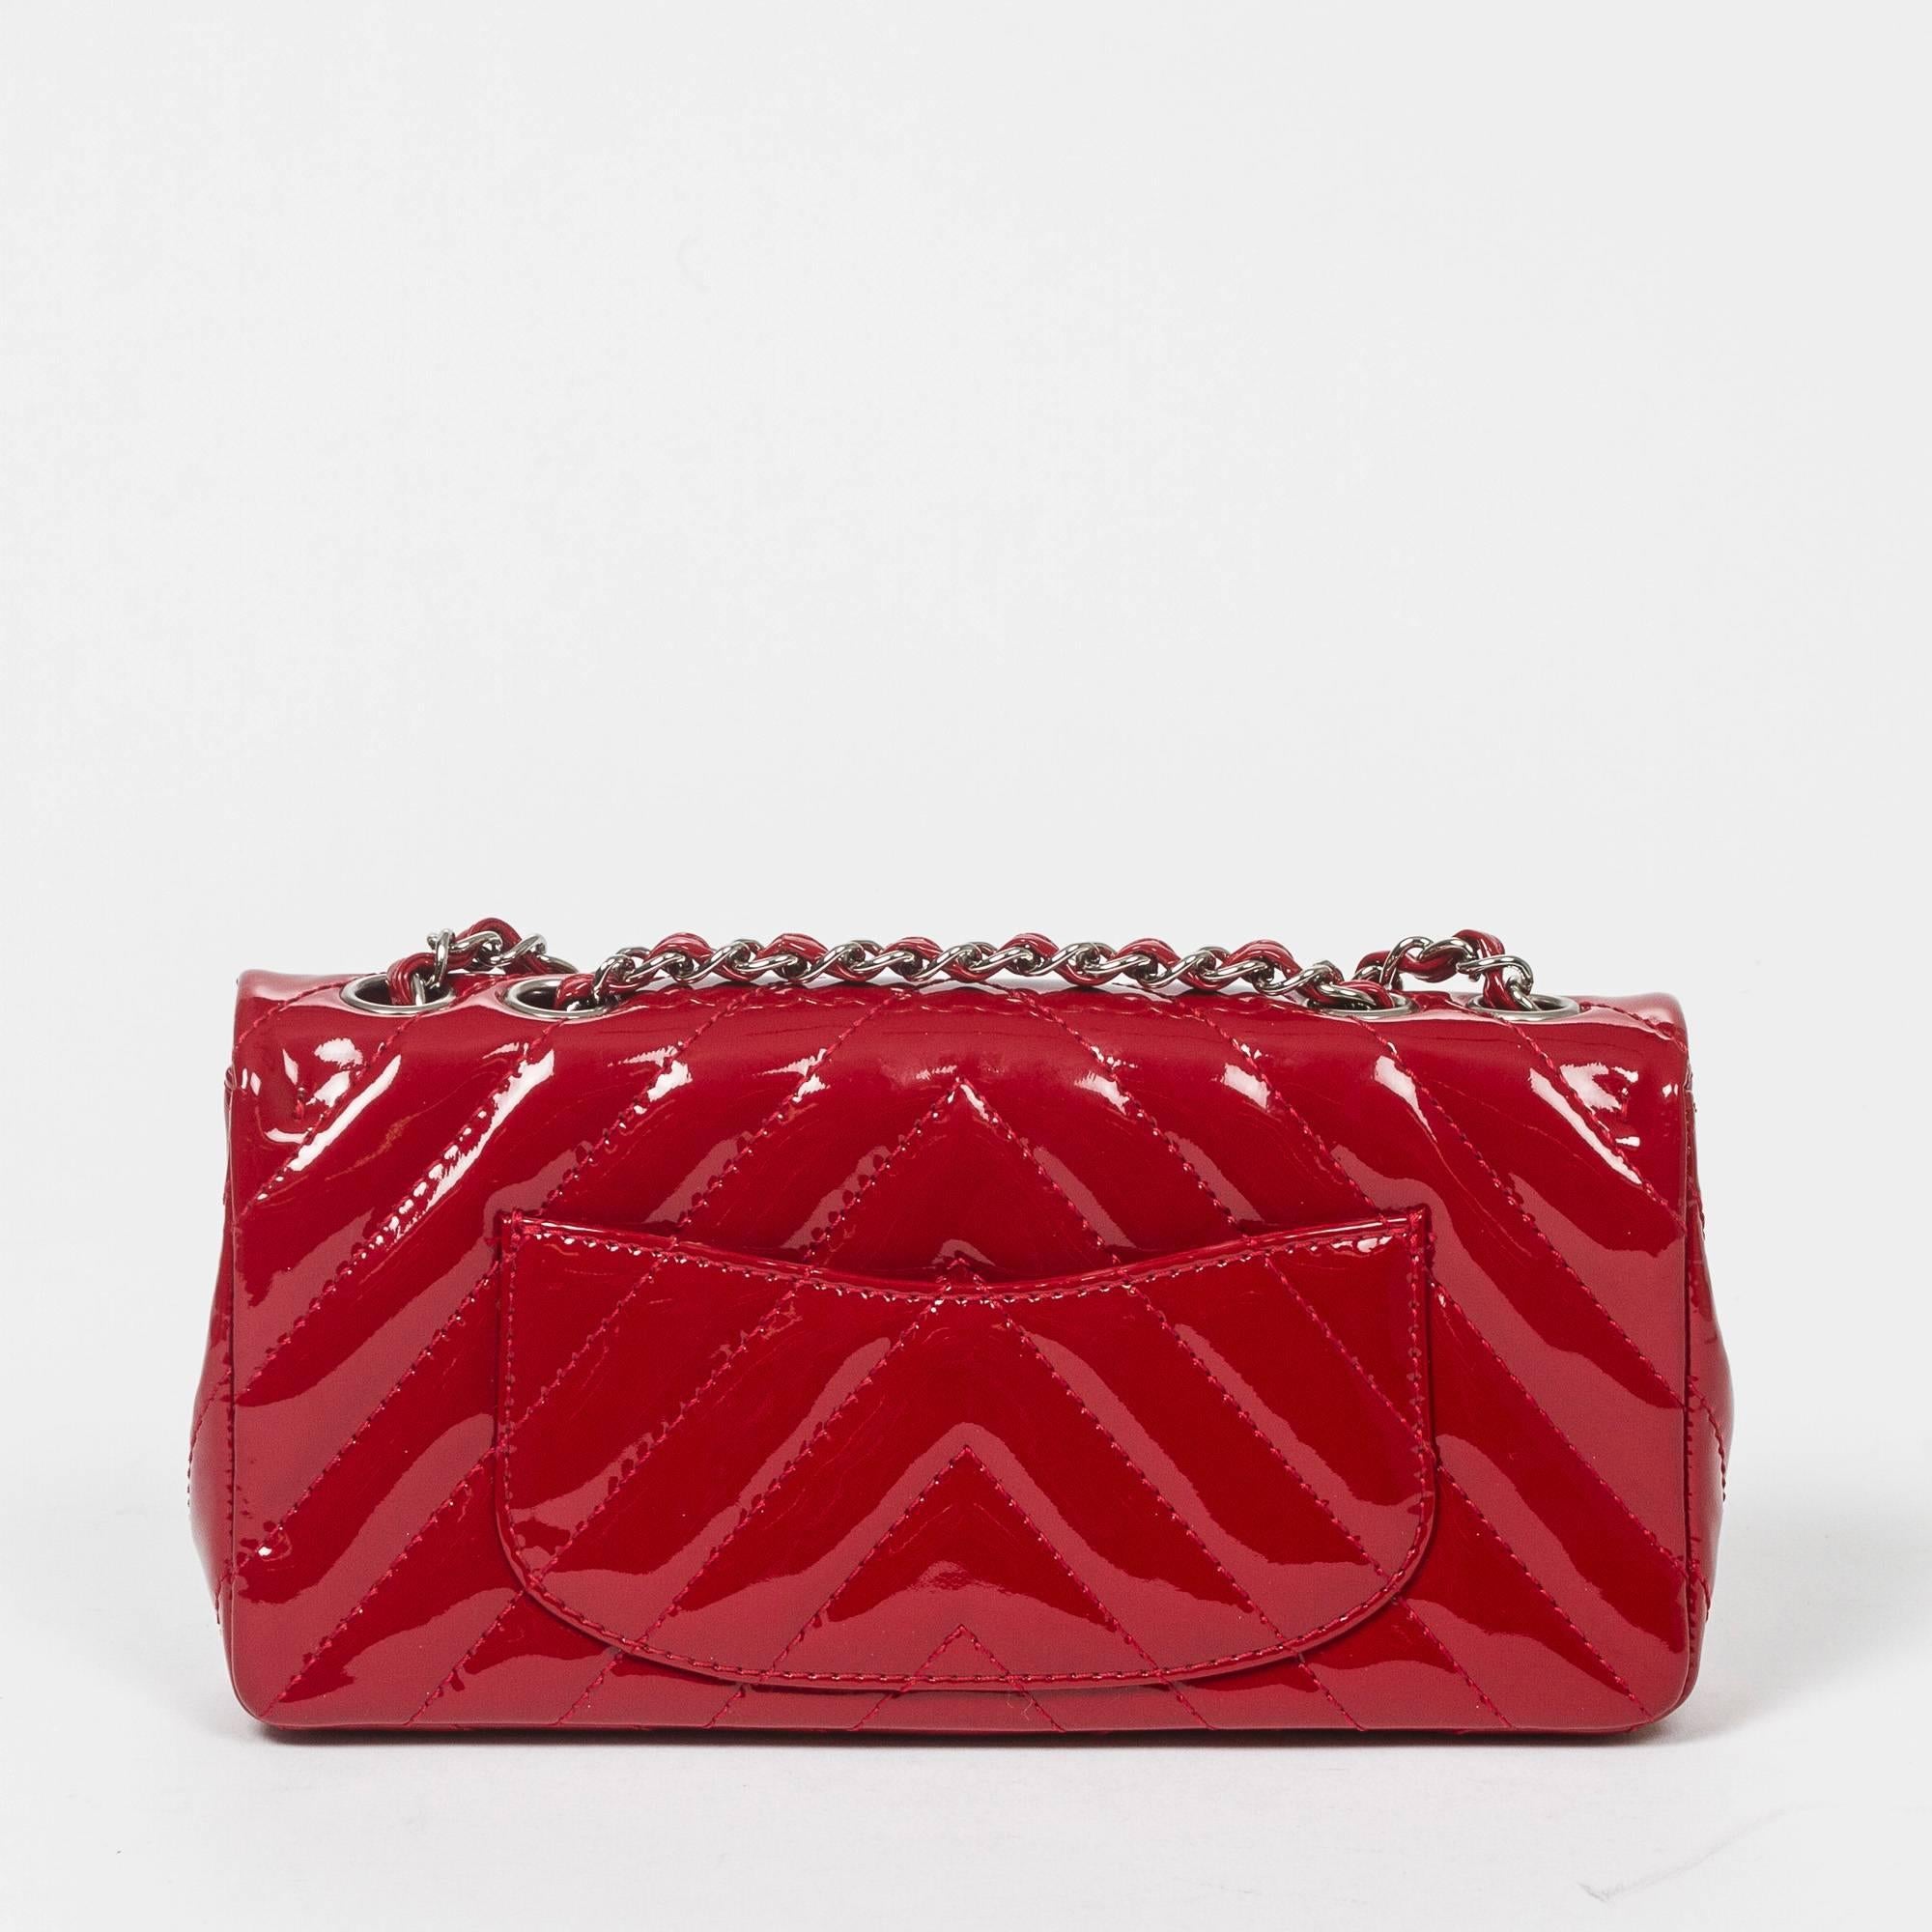 Chanel - East West Flap Red Chevron Quilted Patent Leather 1